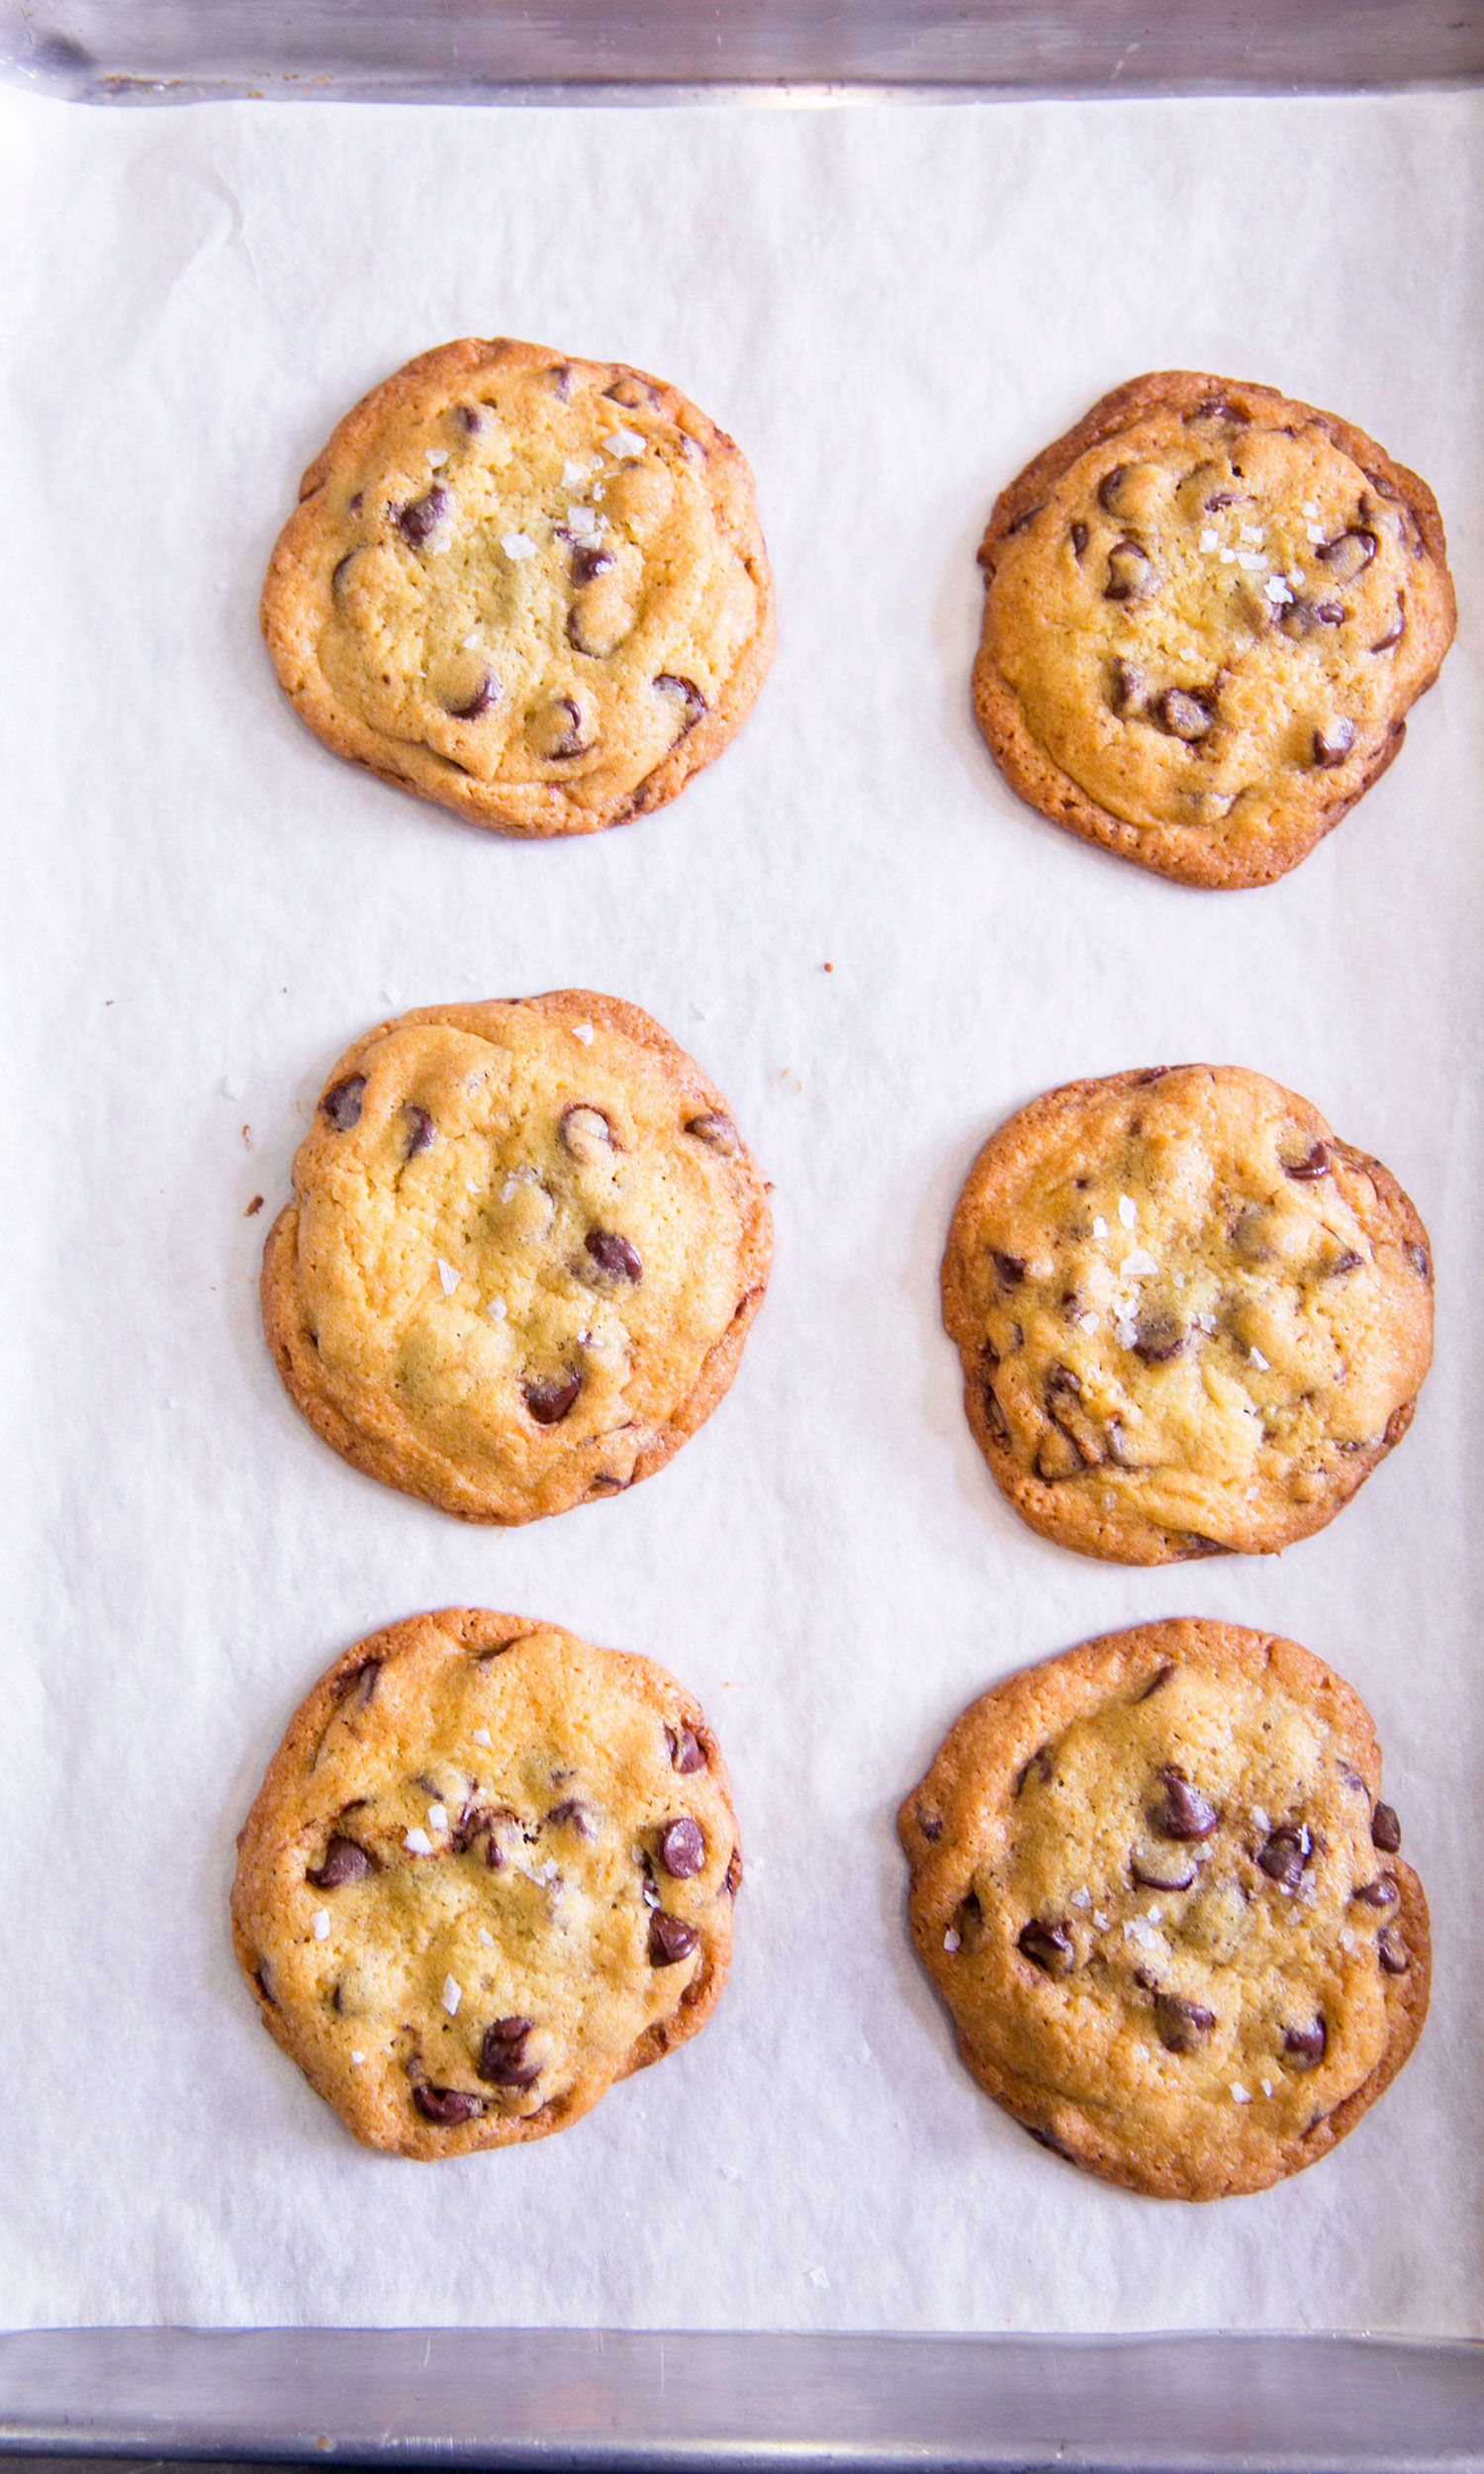 Sprinkle Sea Salt On Your Chocolate Chip Cookies For A Crowd-Pleaser